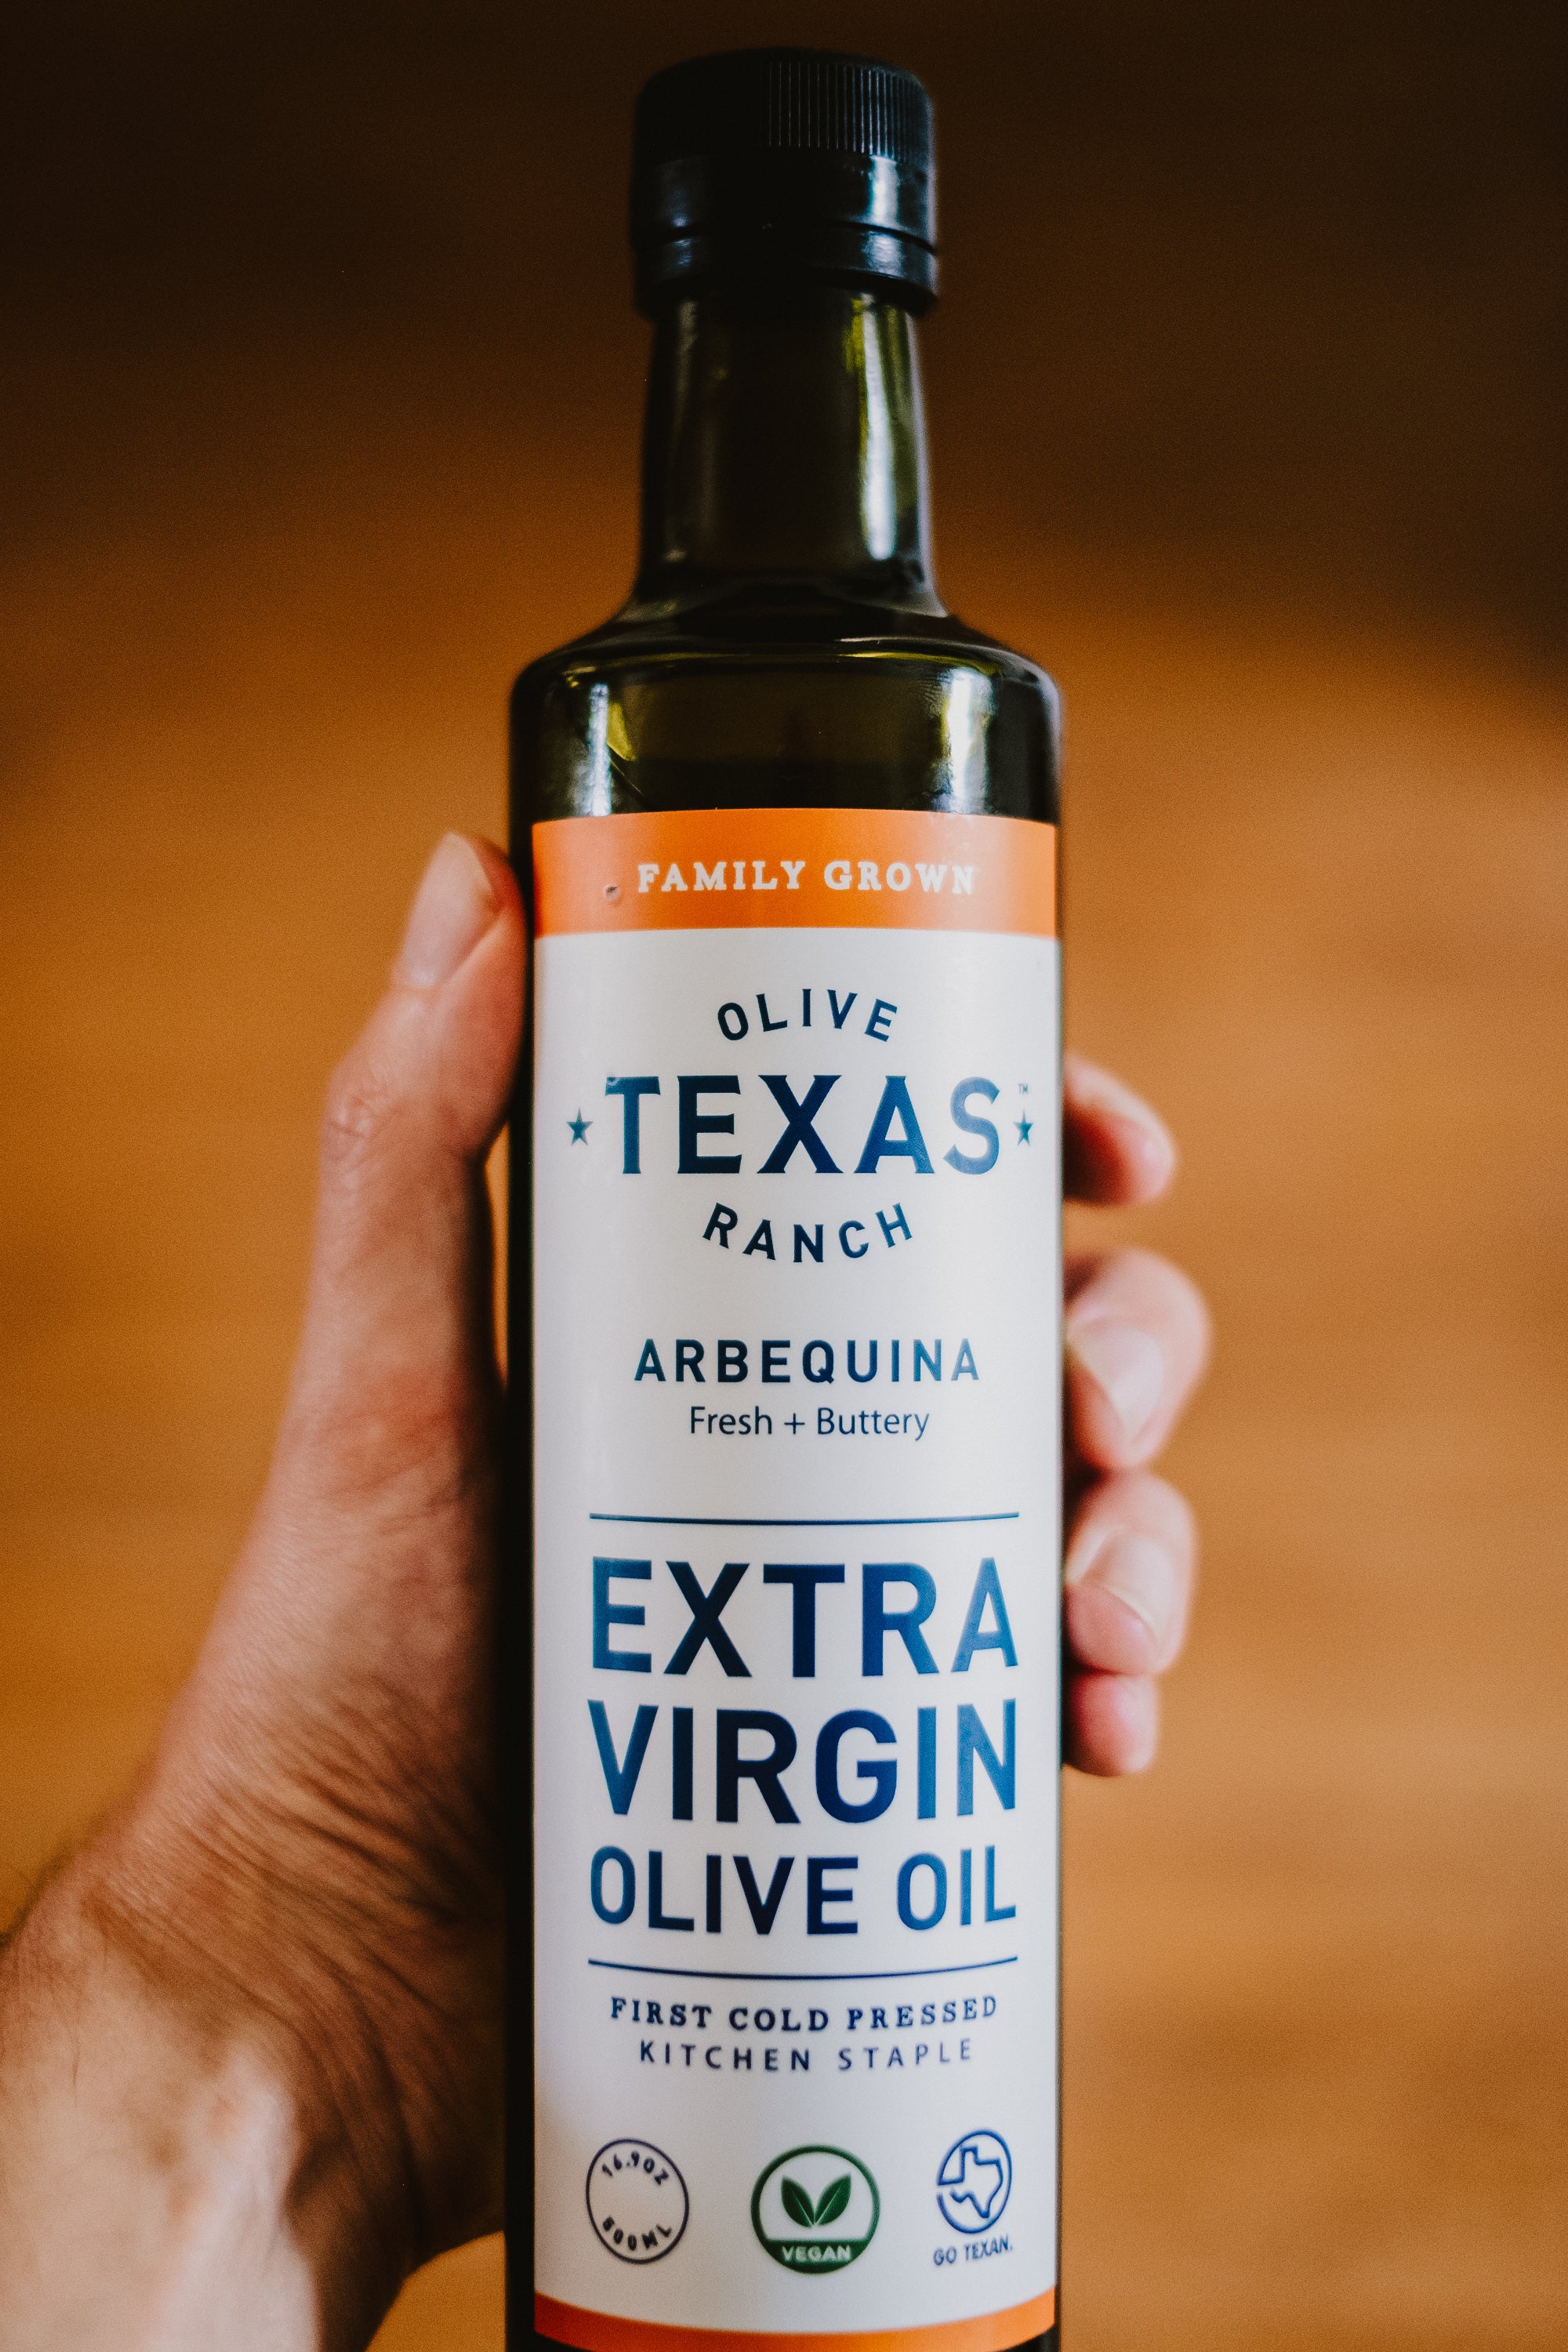 From Farm to Field––The Journey of Texas Olive Ranch and Texas Rangers